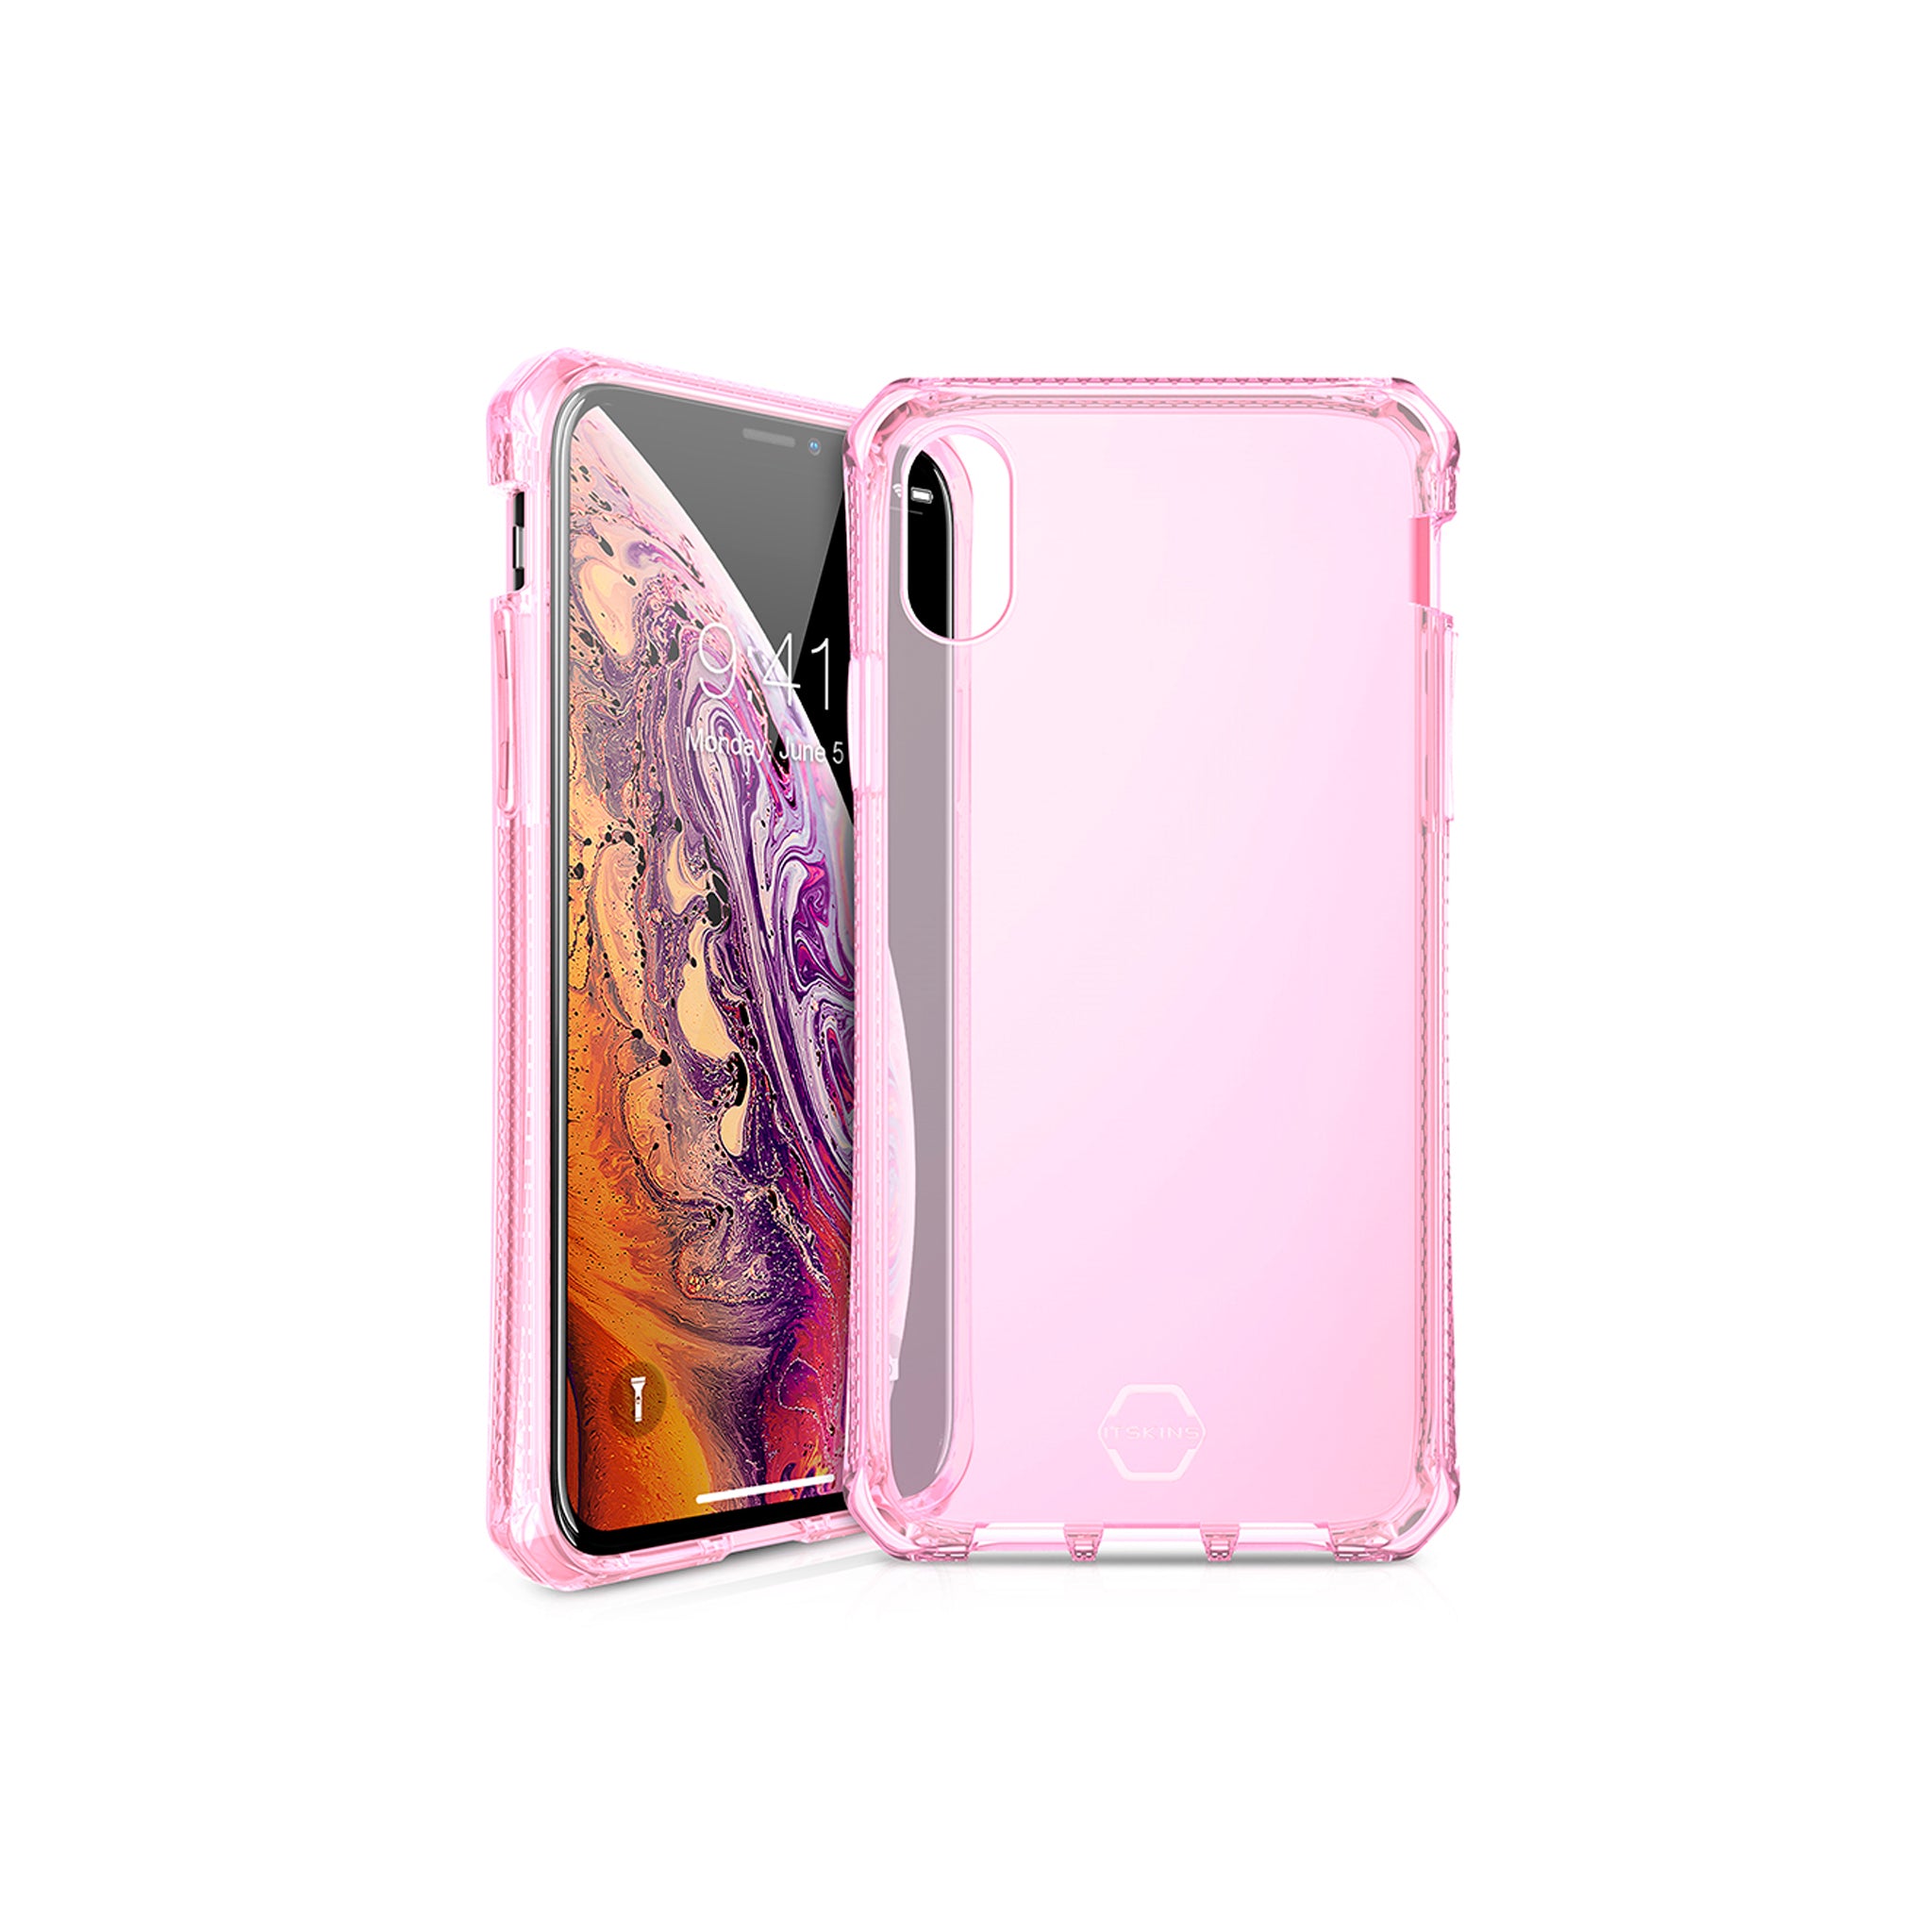 Itskins - Spectrum Clear Case For Apple Iphone Xs / X - Light Pink